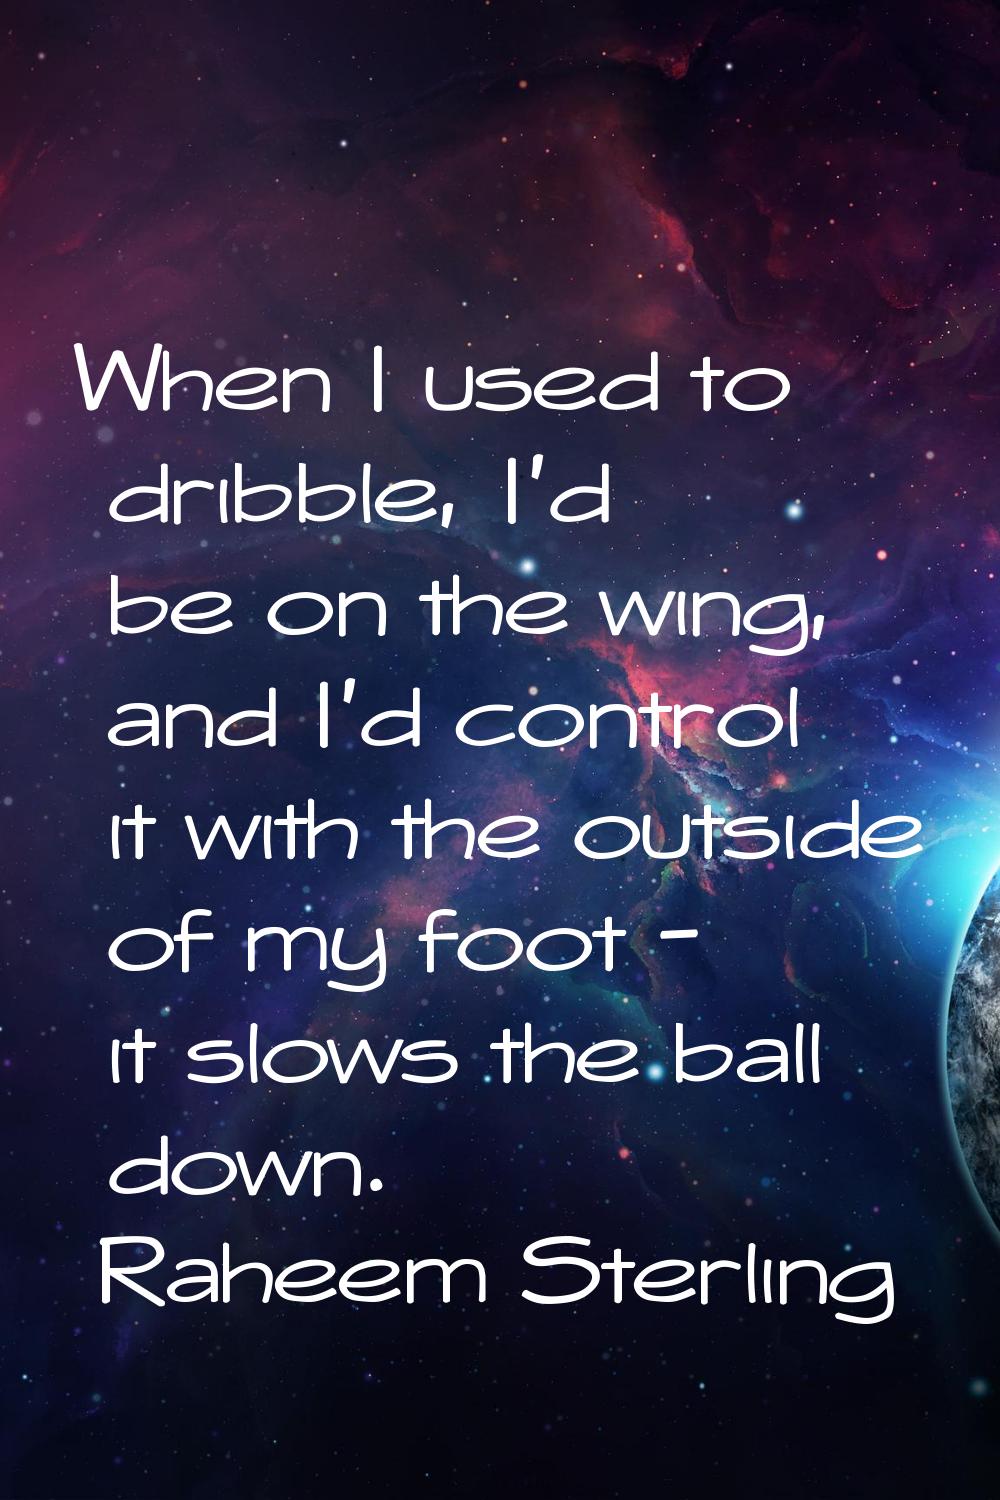 When I used to dribble, I'd be on the wing, and I'd control it with the outside of my foot - it slo